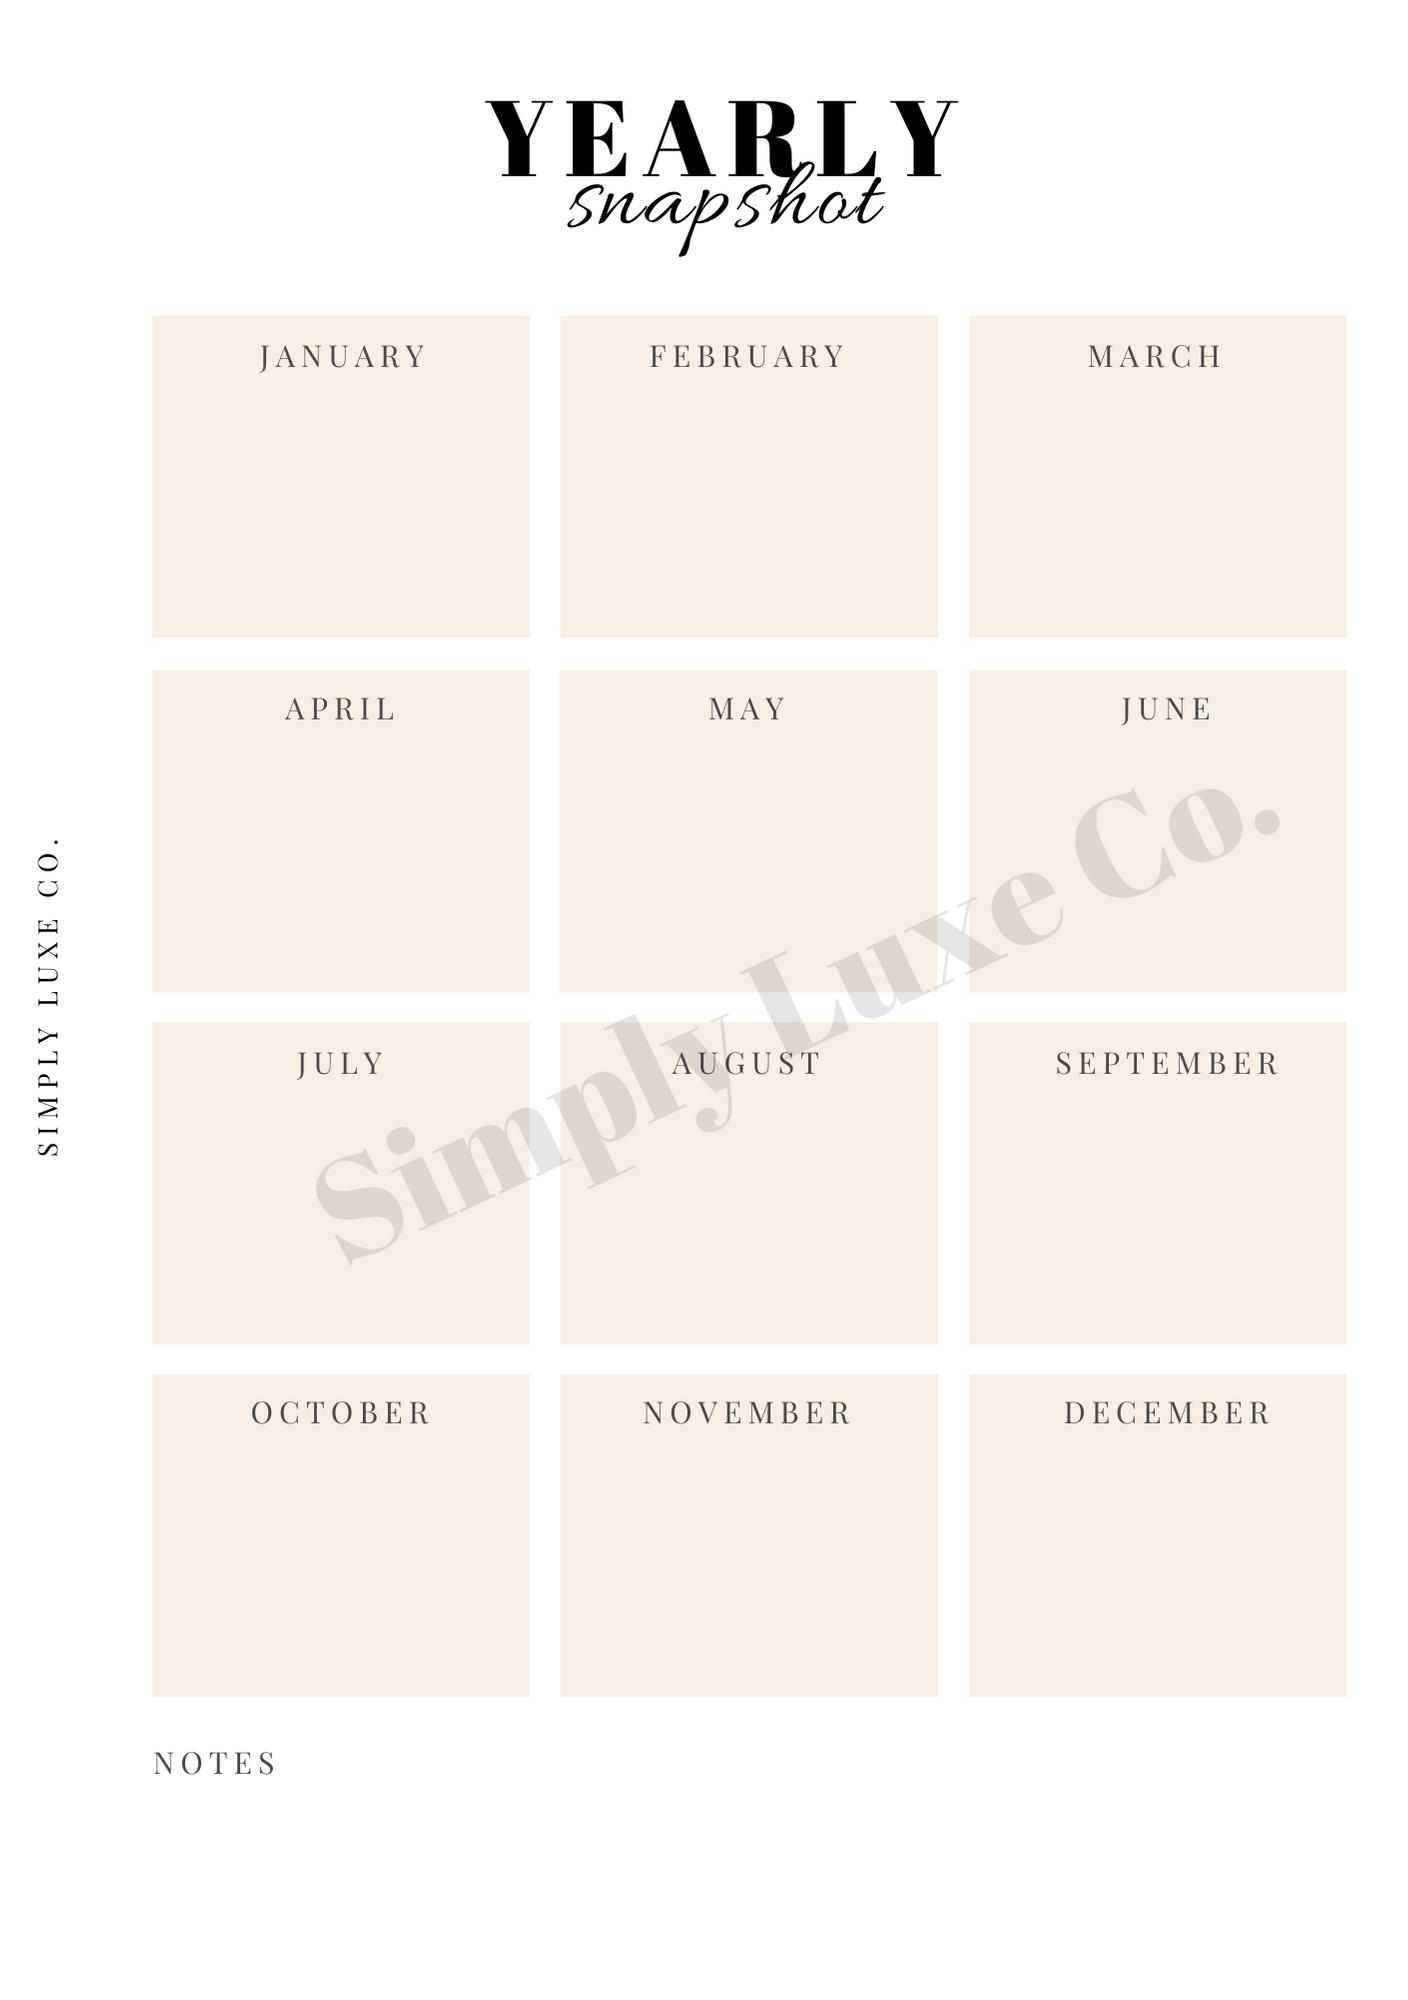 Yearly Snapshot Printable Insert - Available in 2 colors